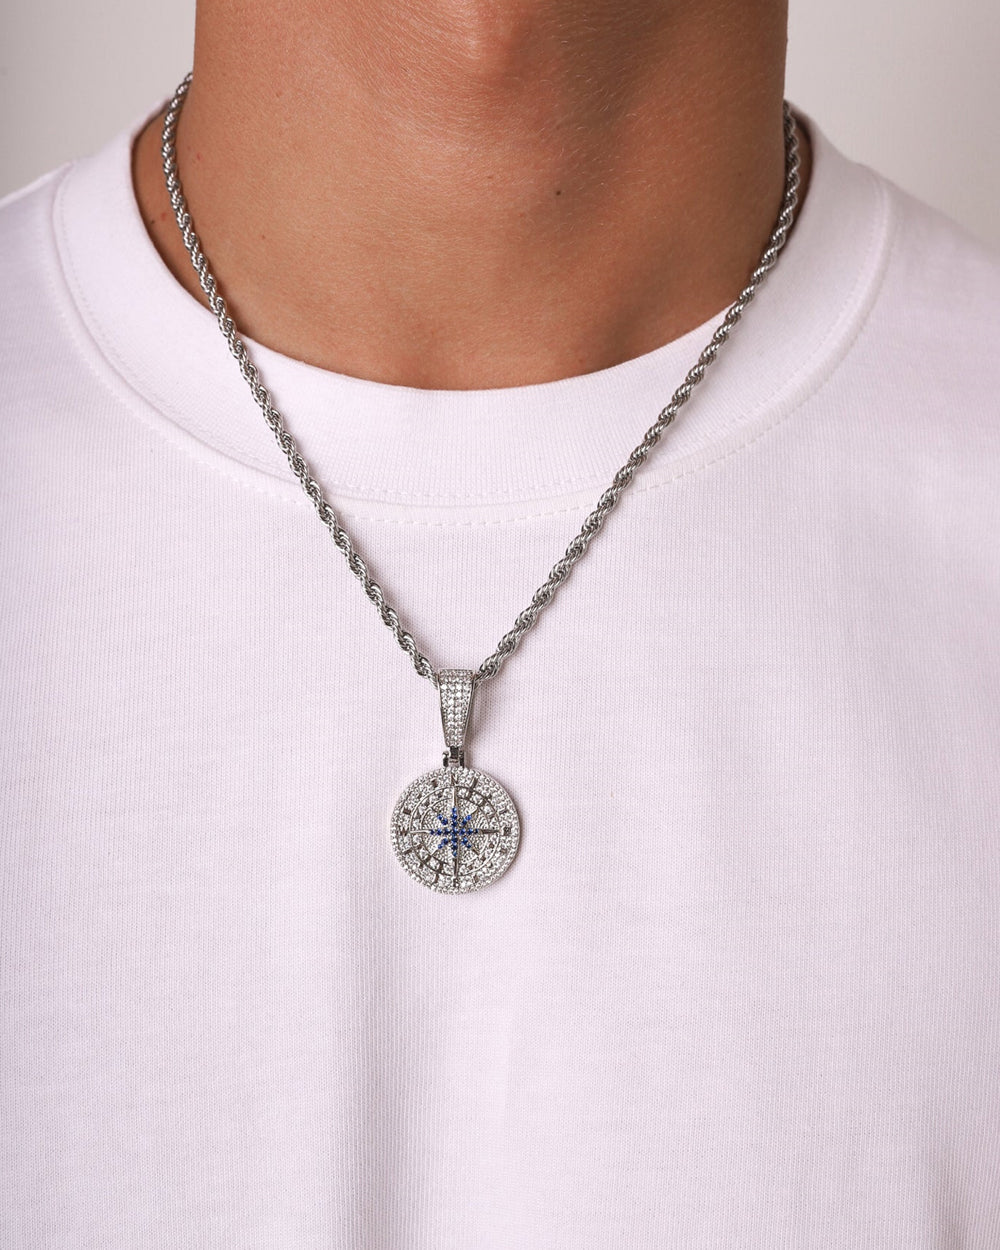 ICED COMPASS PENDANT. - WHITE GOLD